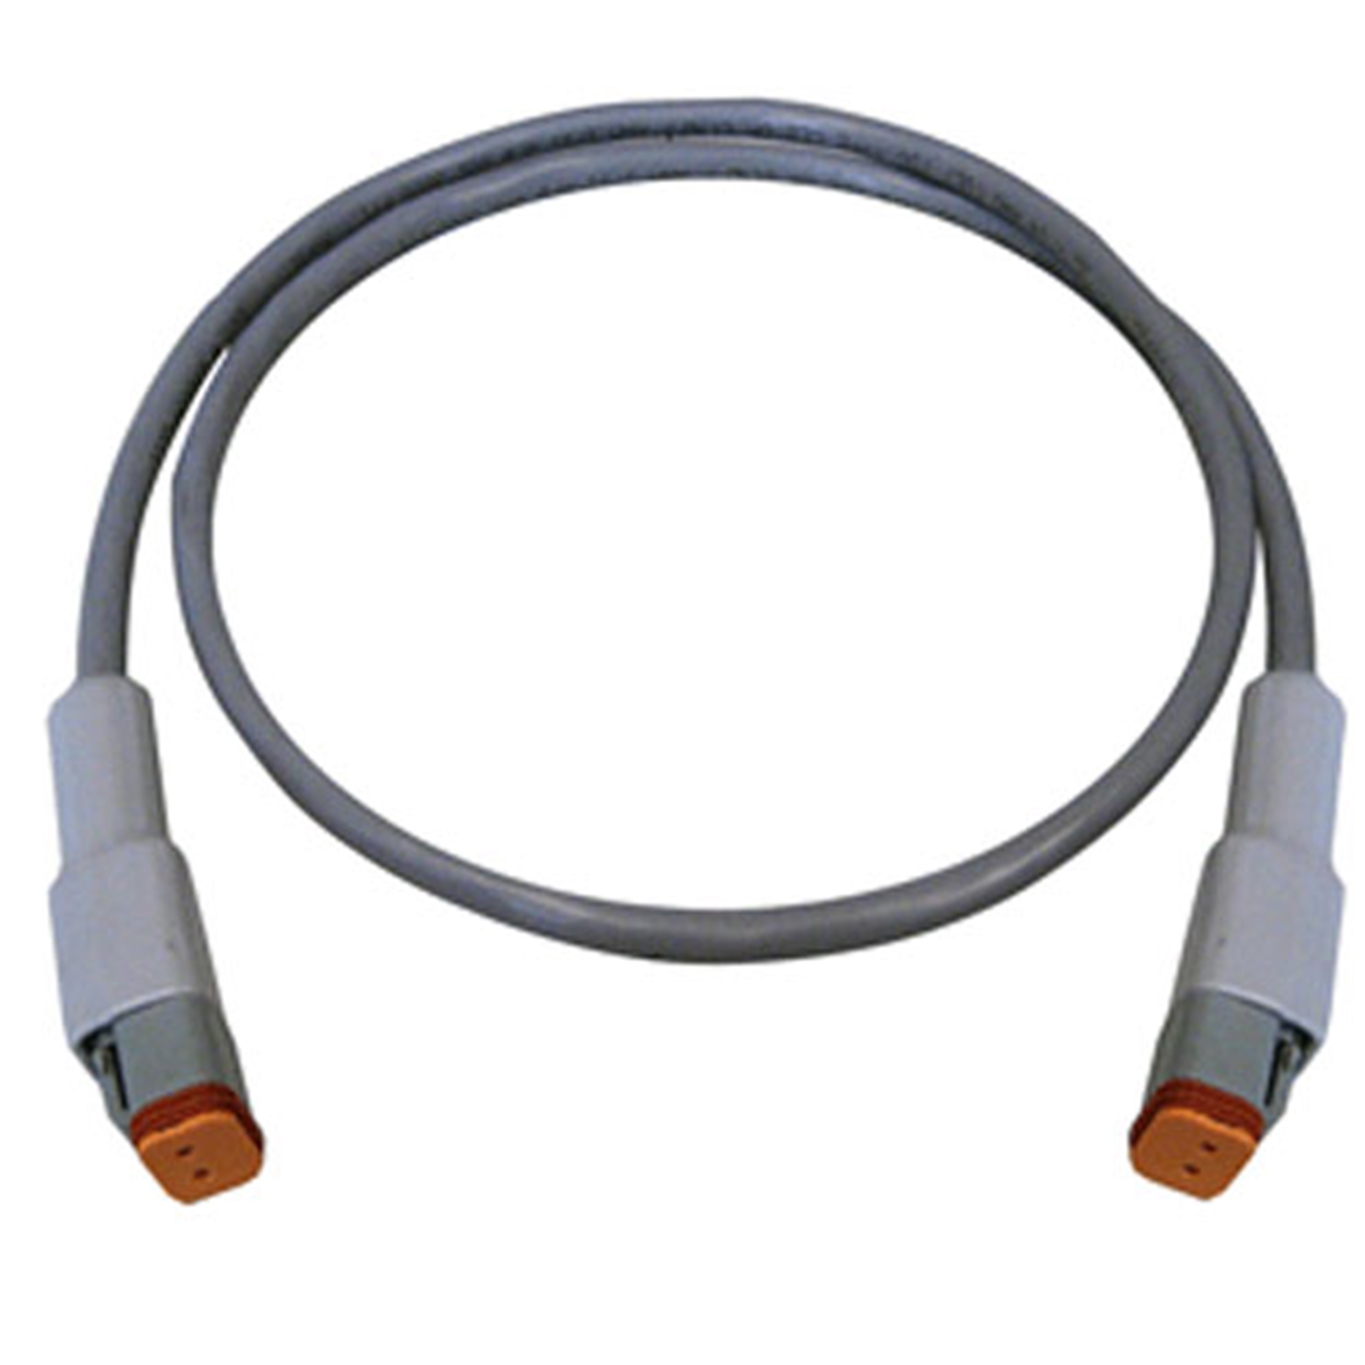 42056S Power Extension Cable 3 Ft Length